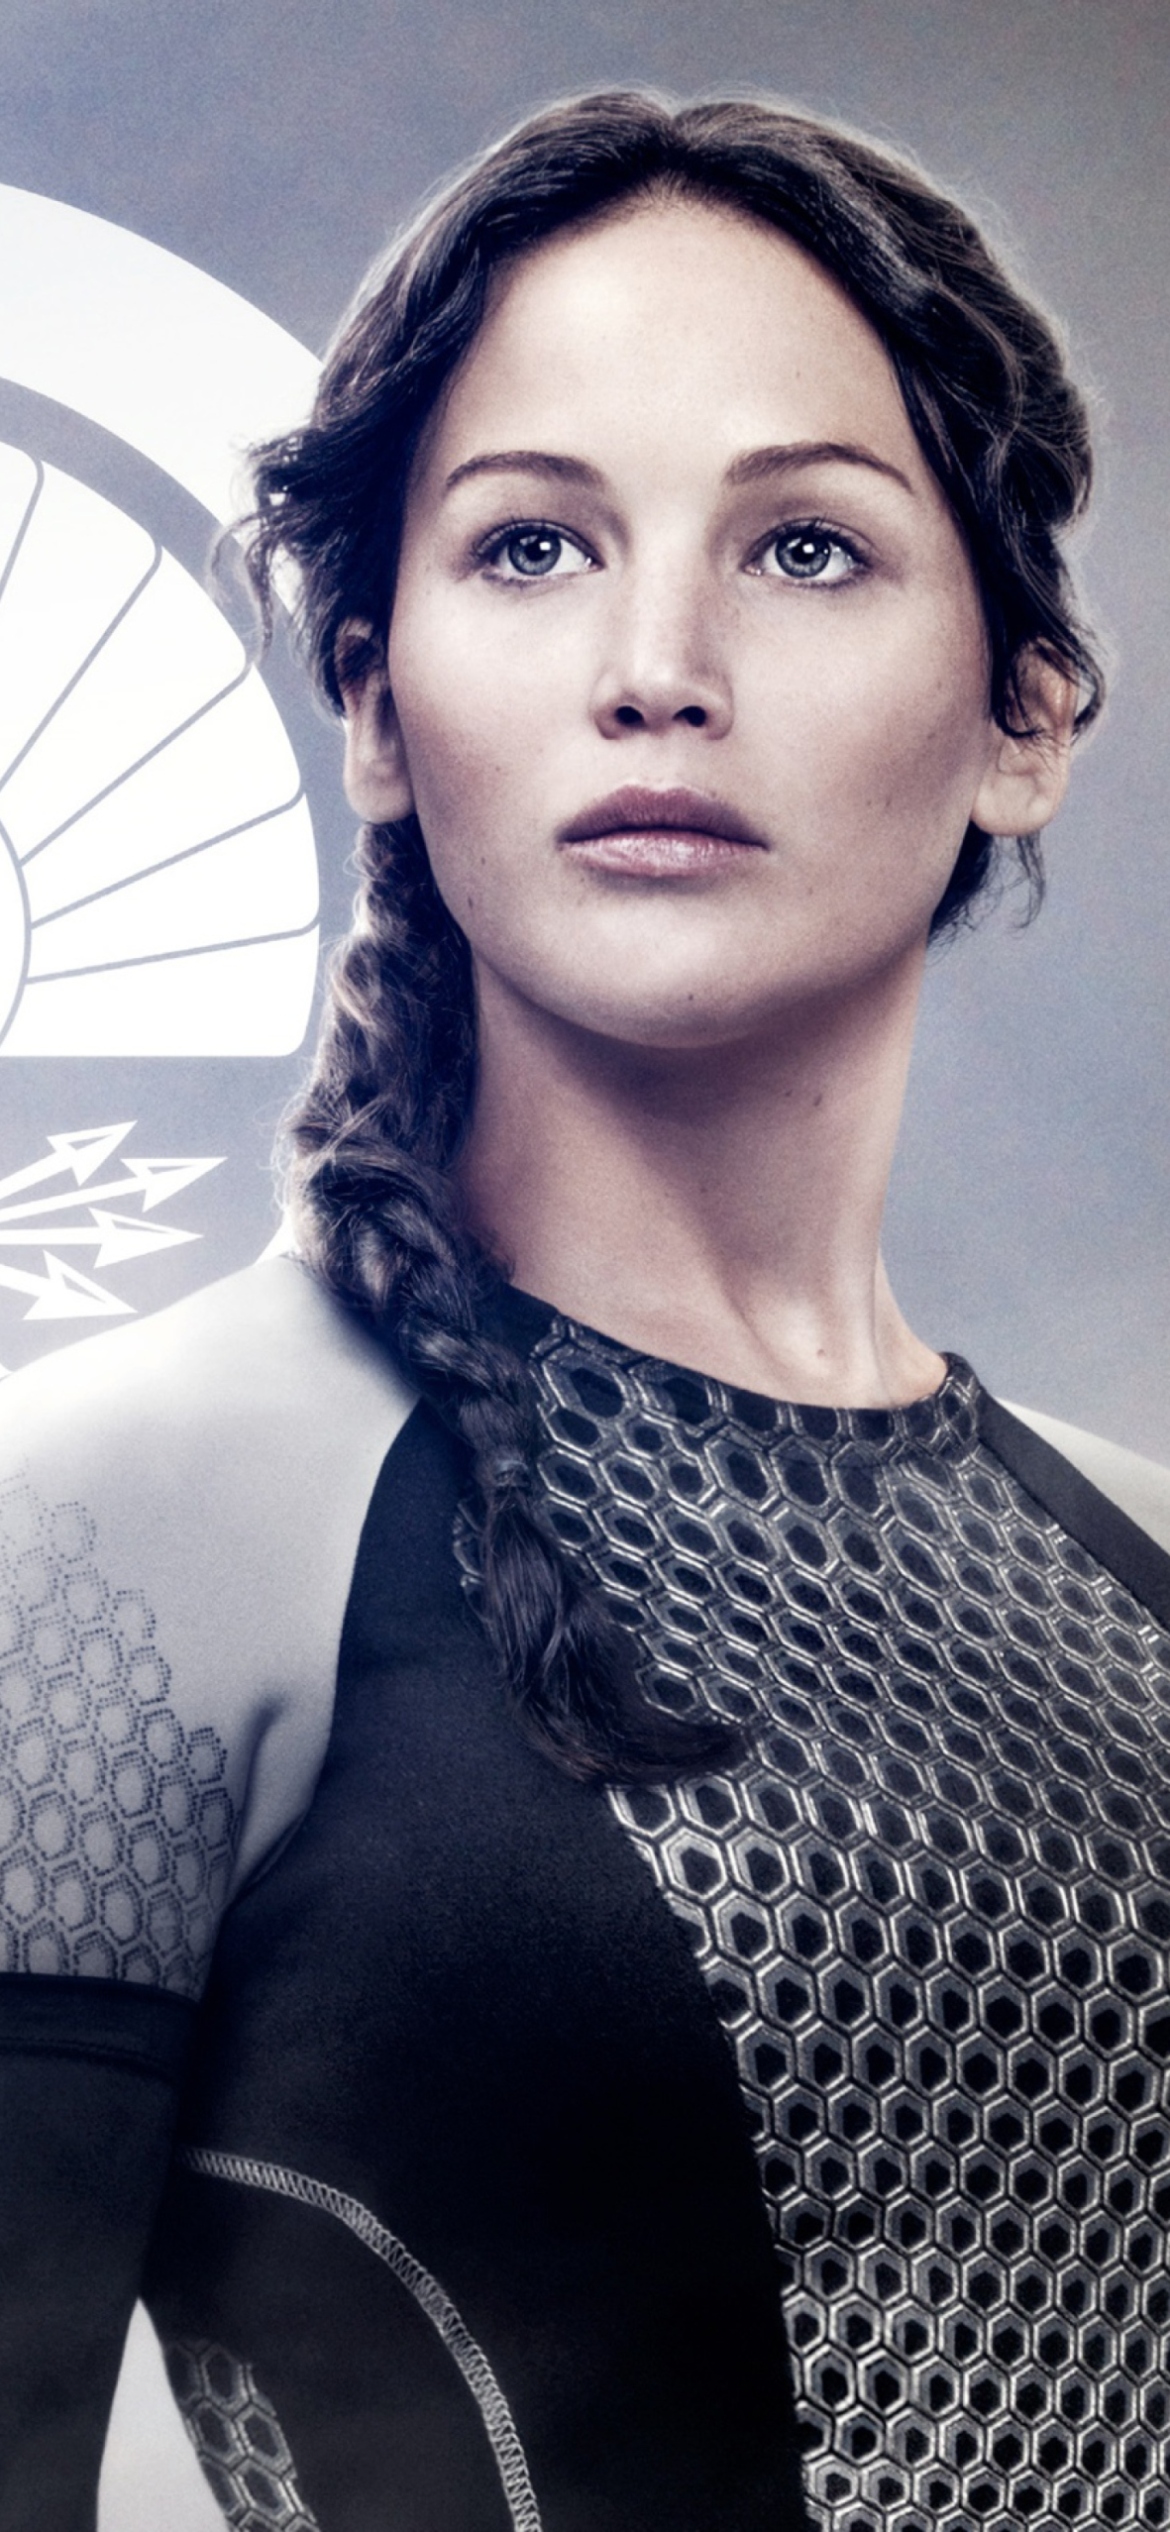 Jennifer Lawrence In The Hunger Games Catching Fire Wallpaper for iPhone 11